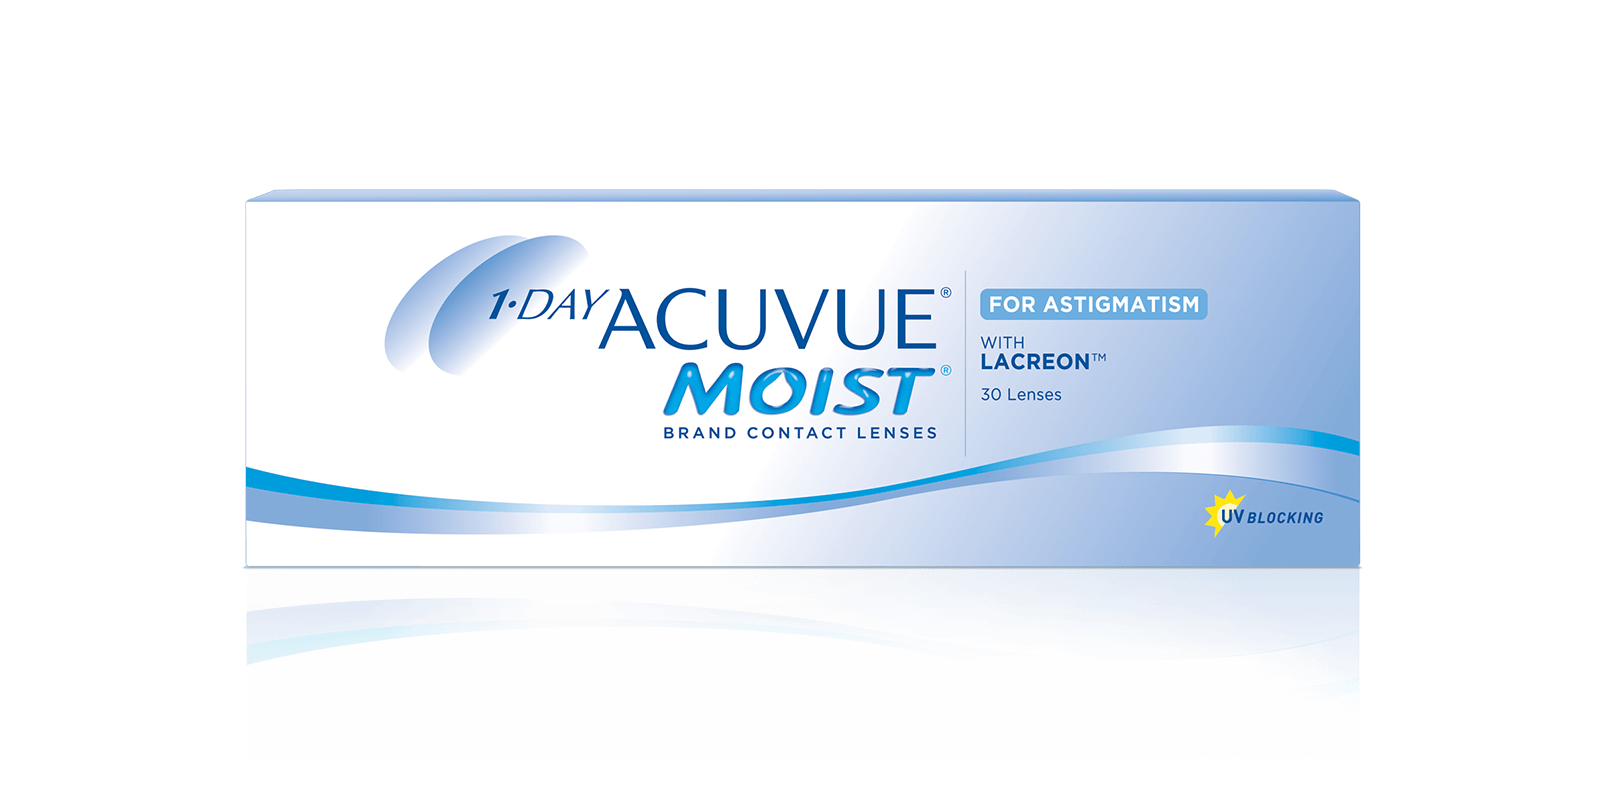 1-DAY ACUVUE Moist for Astigmatism